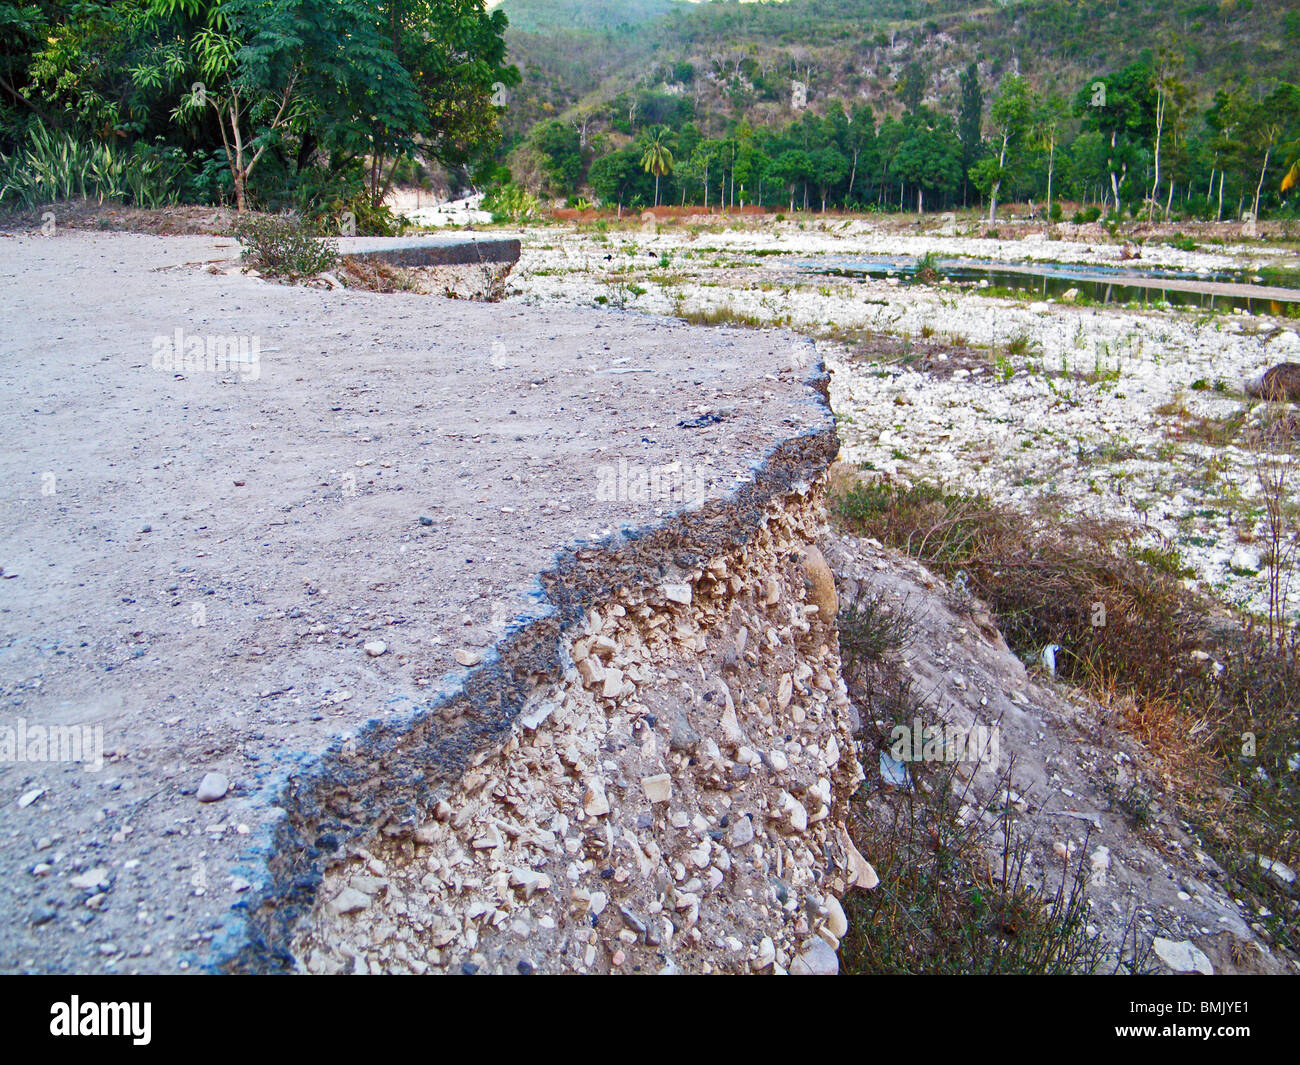 The end of the road - infrastructural damage after the 2008 hurricane season. Near Gonaives, Haiti Stock Photo